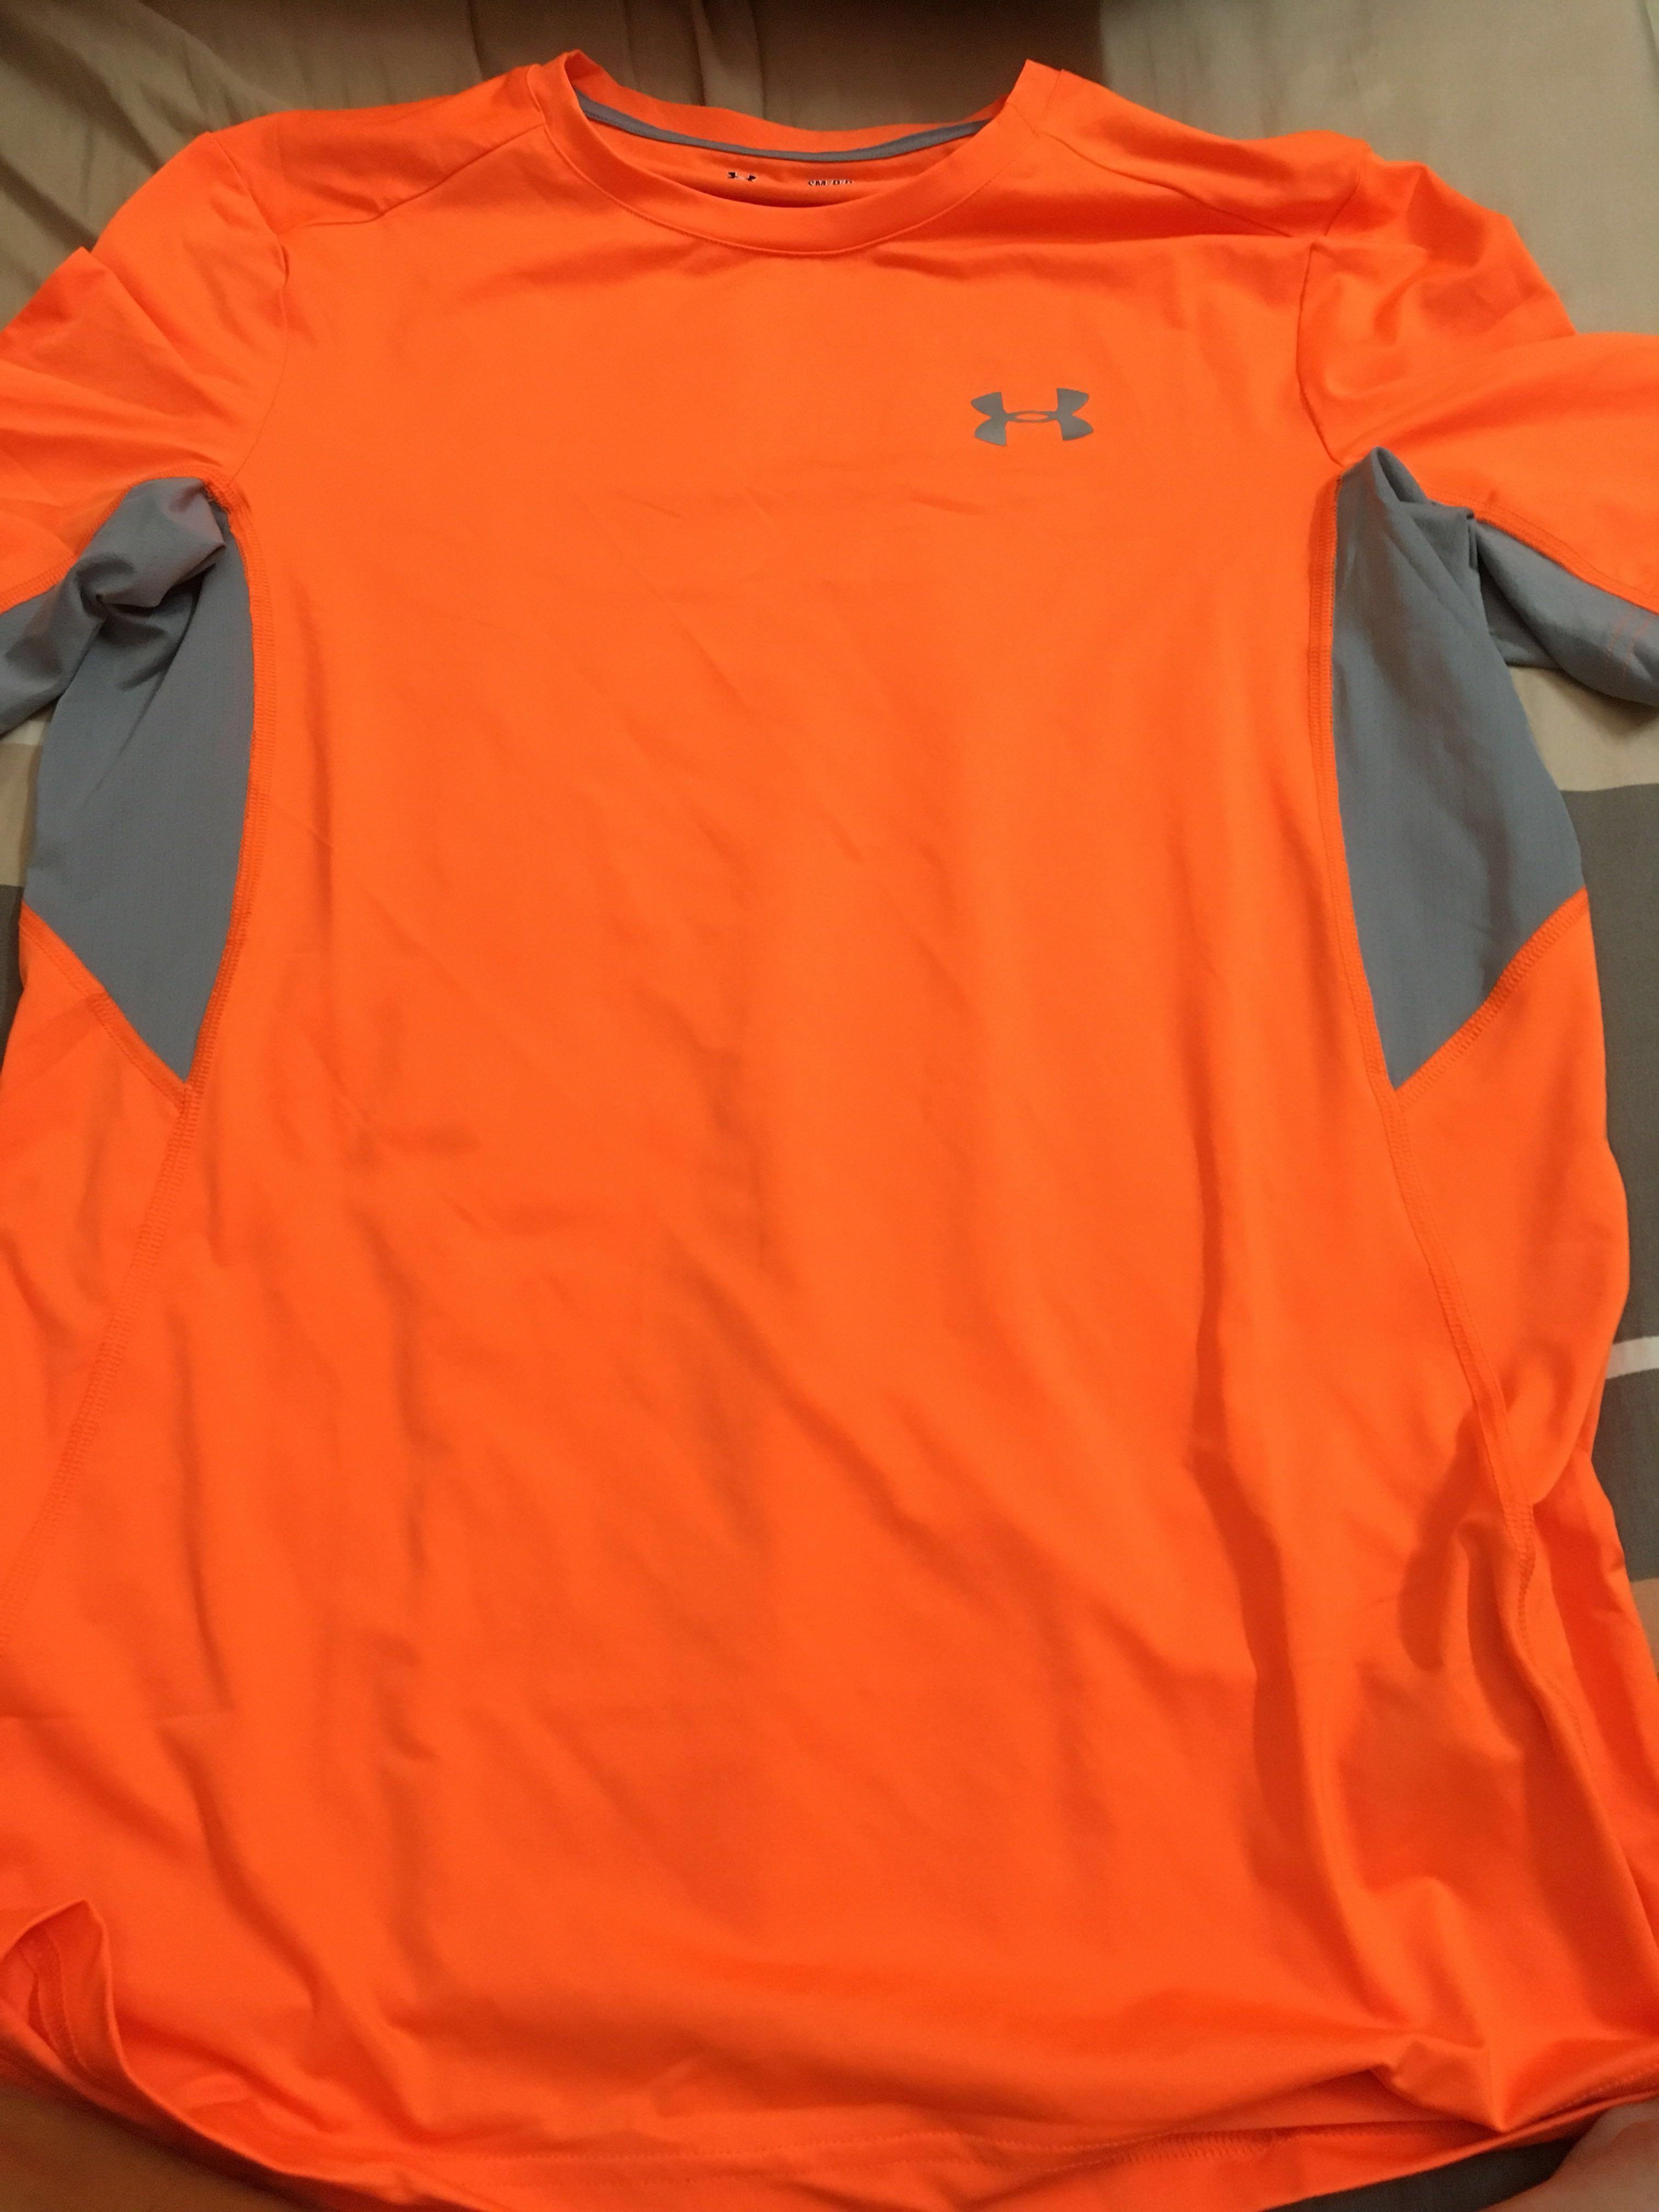 under armor dry fit